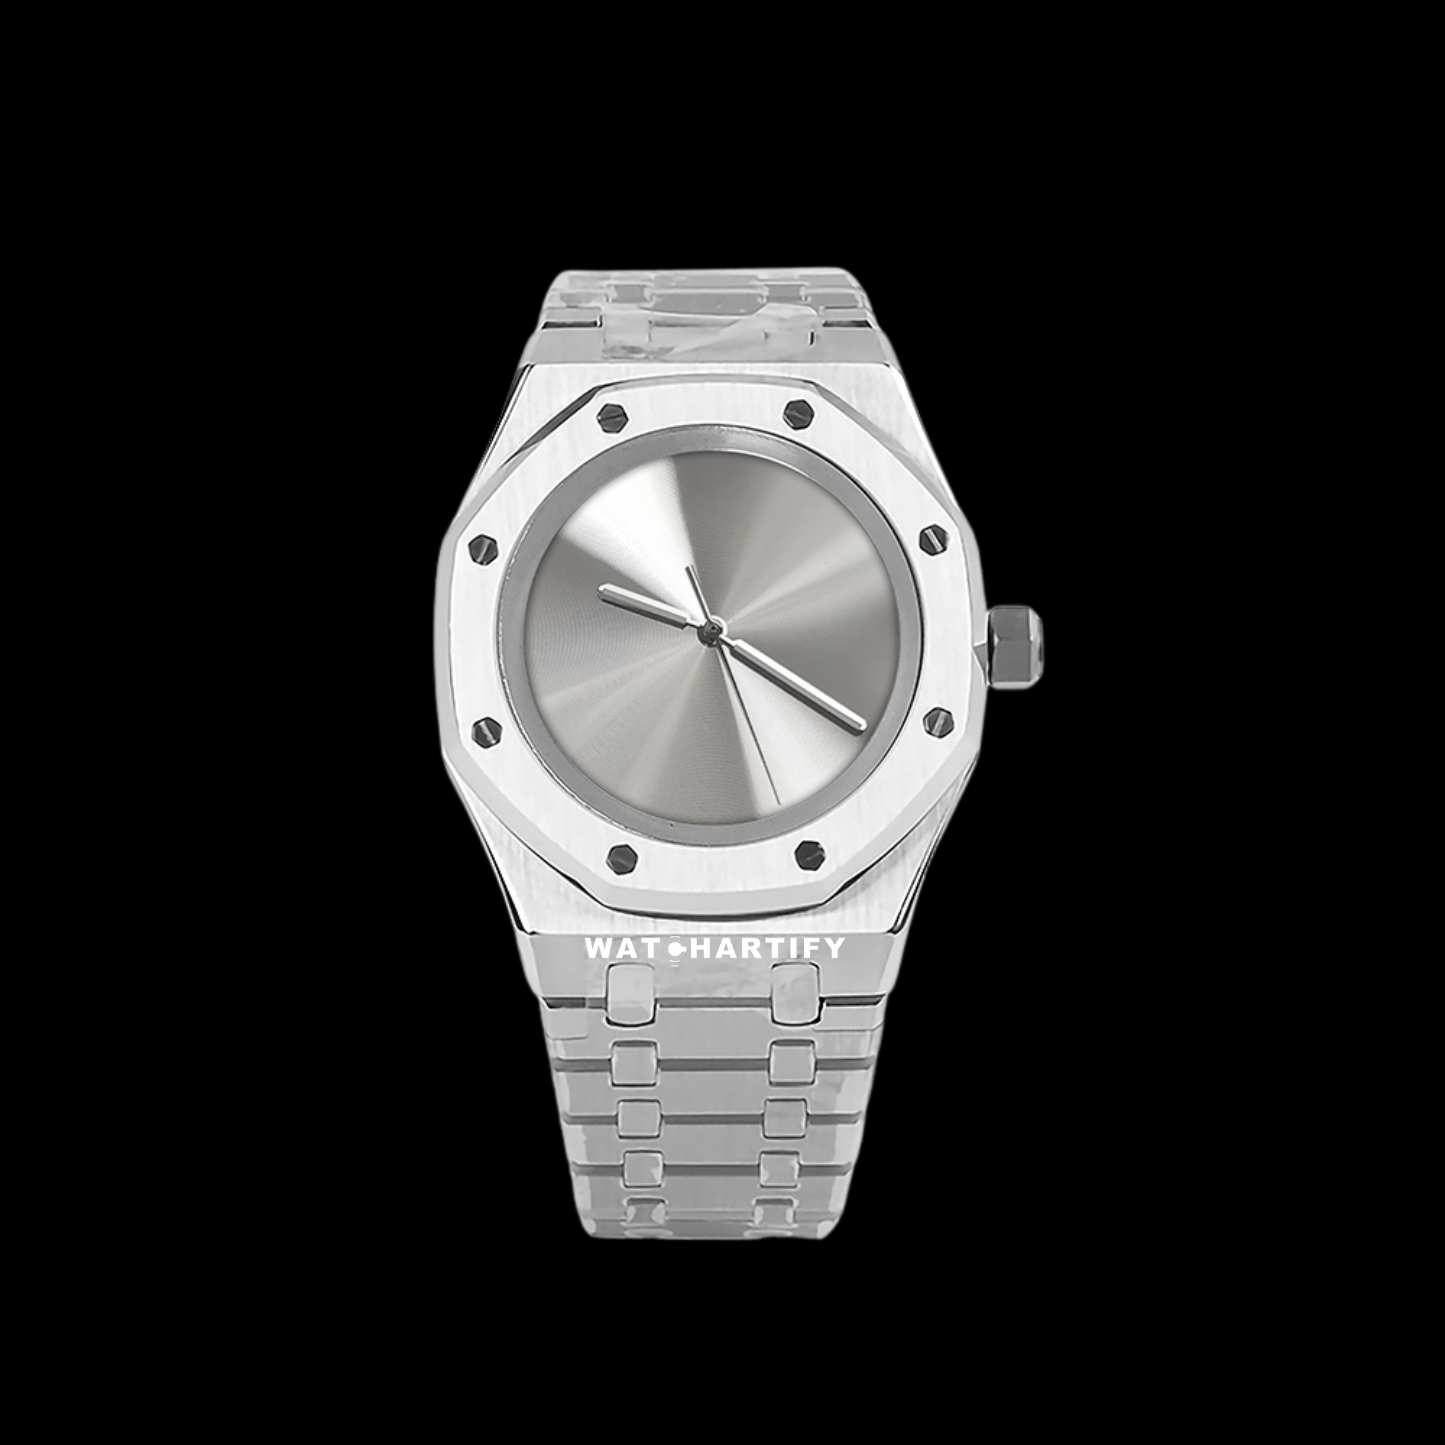 Watchartify Series Royal OAK Solid Silver Face 41MM NH35 Movement Stainless Steel Strap